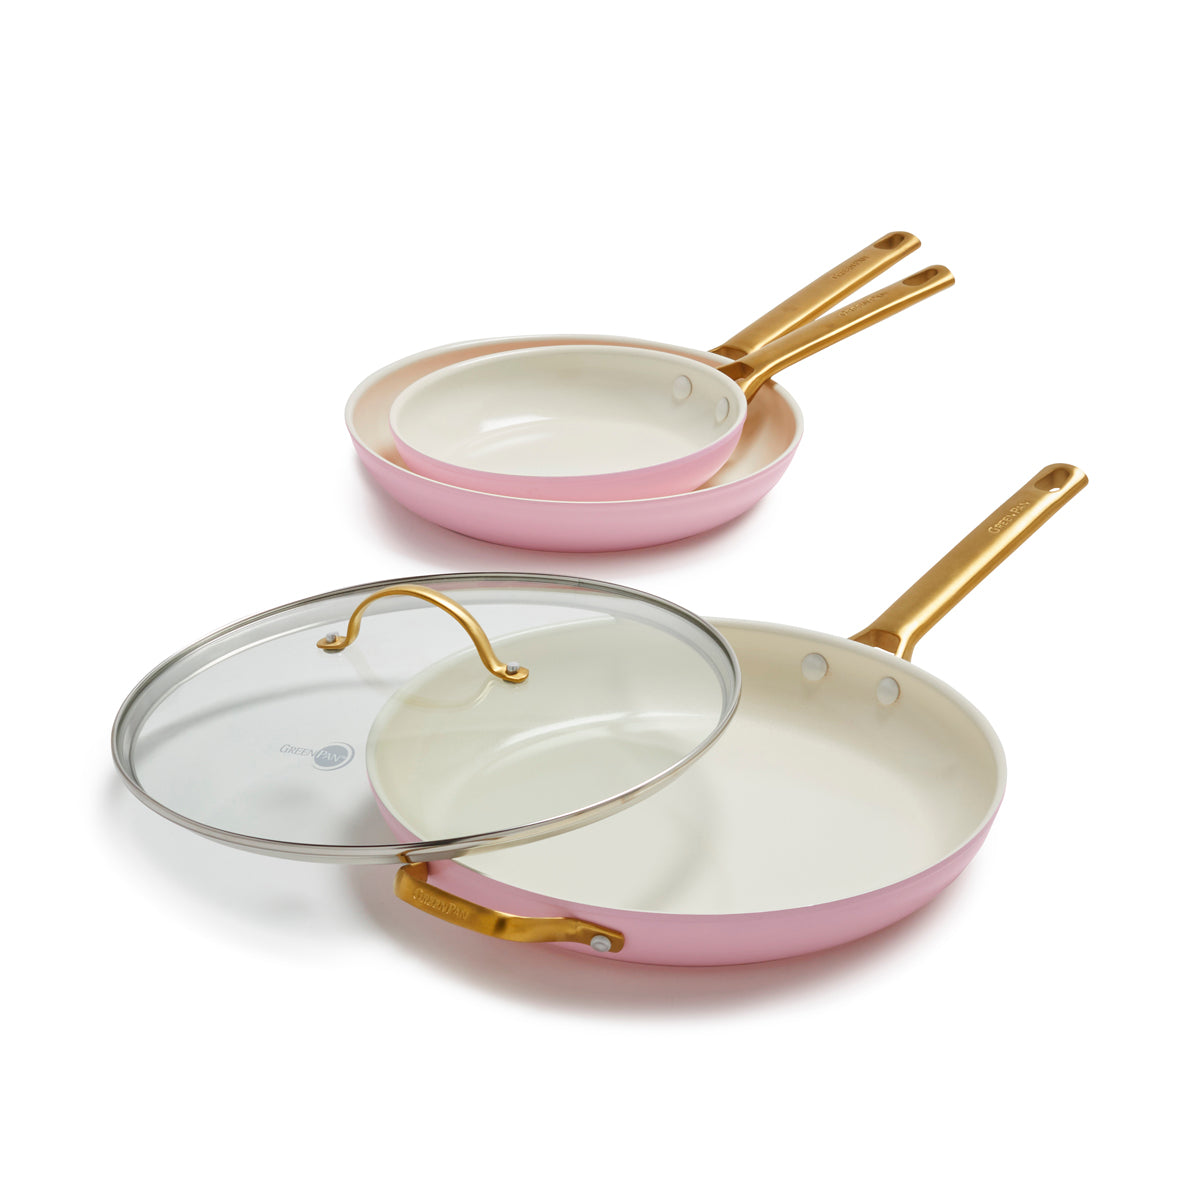 Reserve Ceramic Nonstick 8", 10", and 12" Frypan Set with Lid | Blush with Gold-Tone Handles